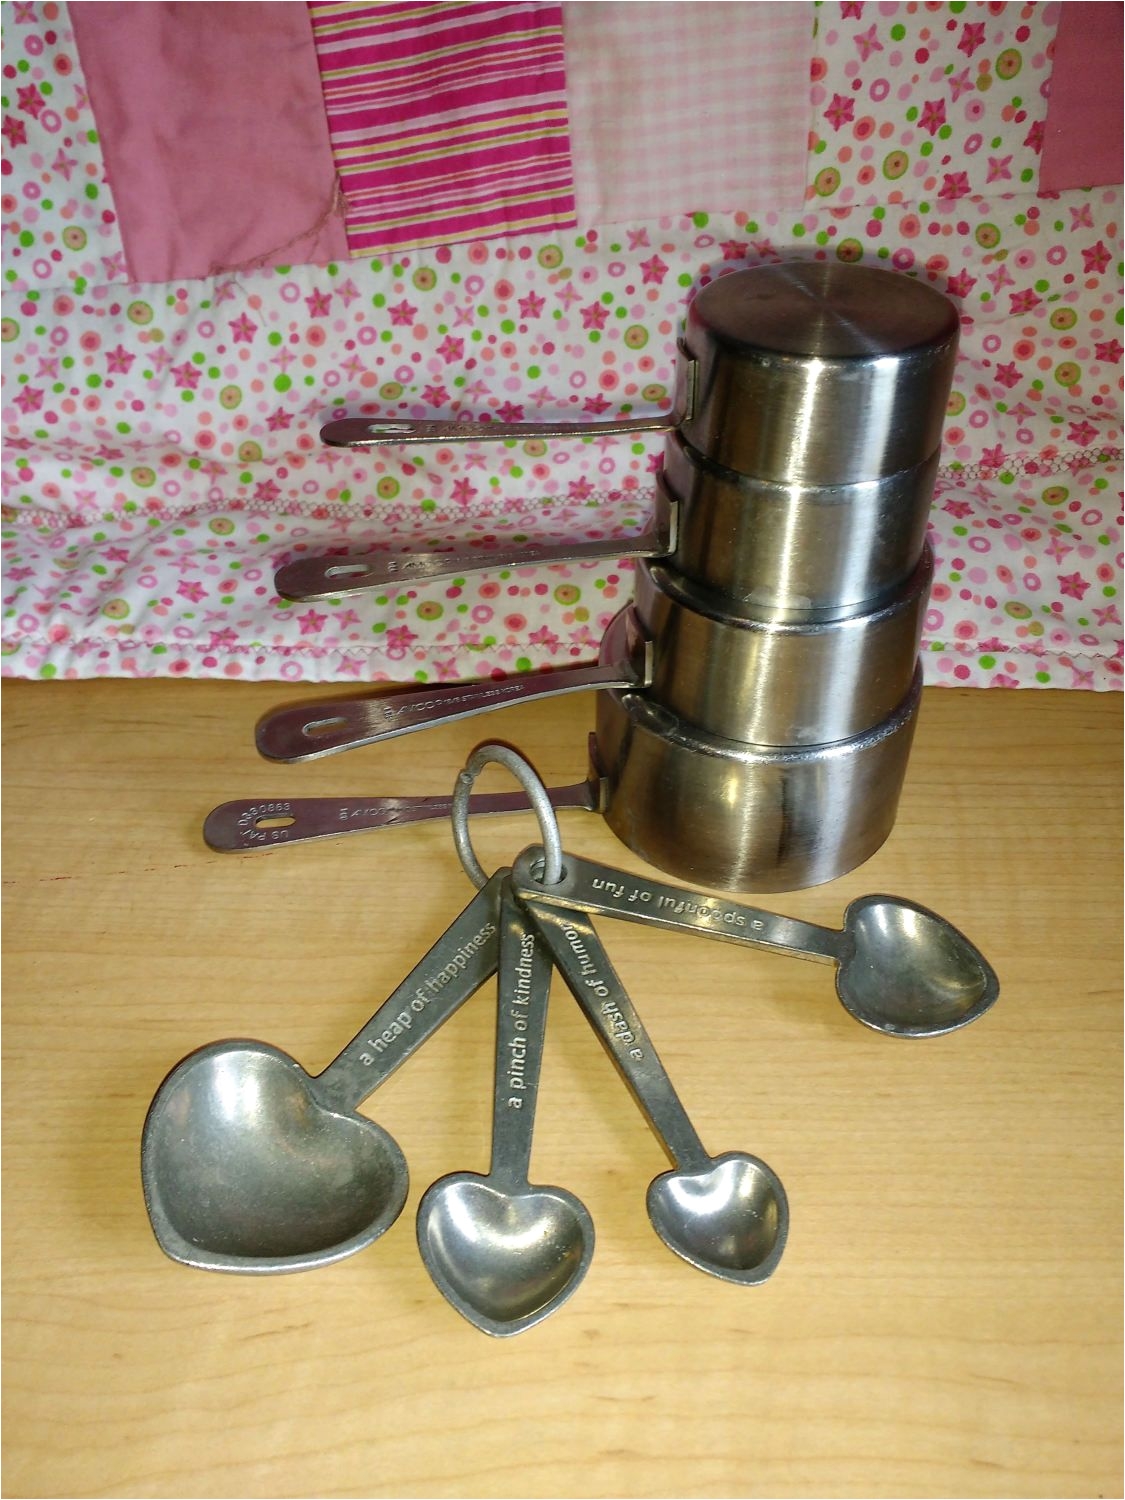 retro pewter heart shaped measuring spoons with stainless steel amco measuring cups baking gift by suburbantreasure